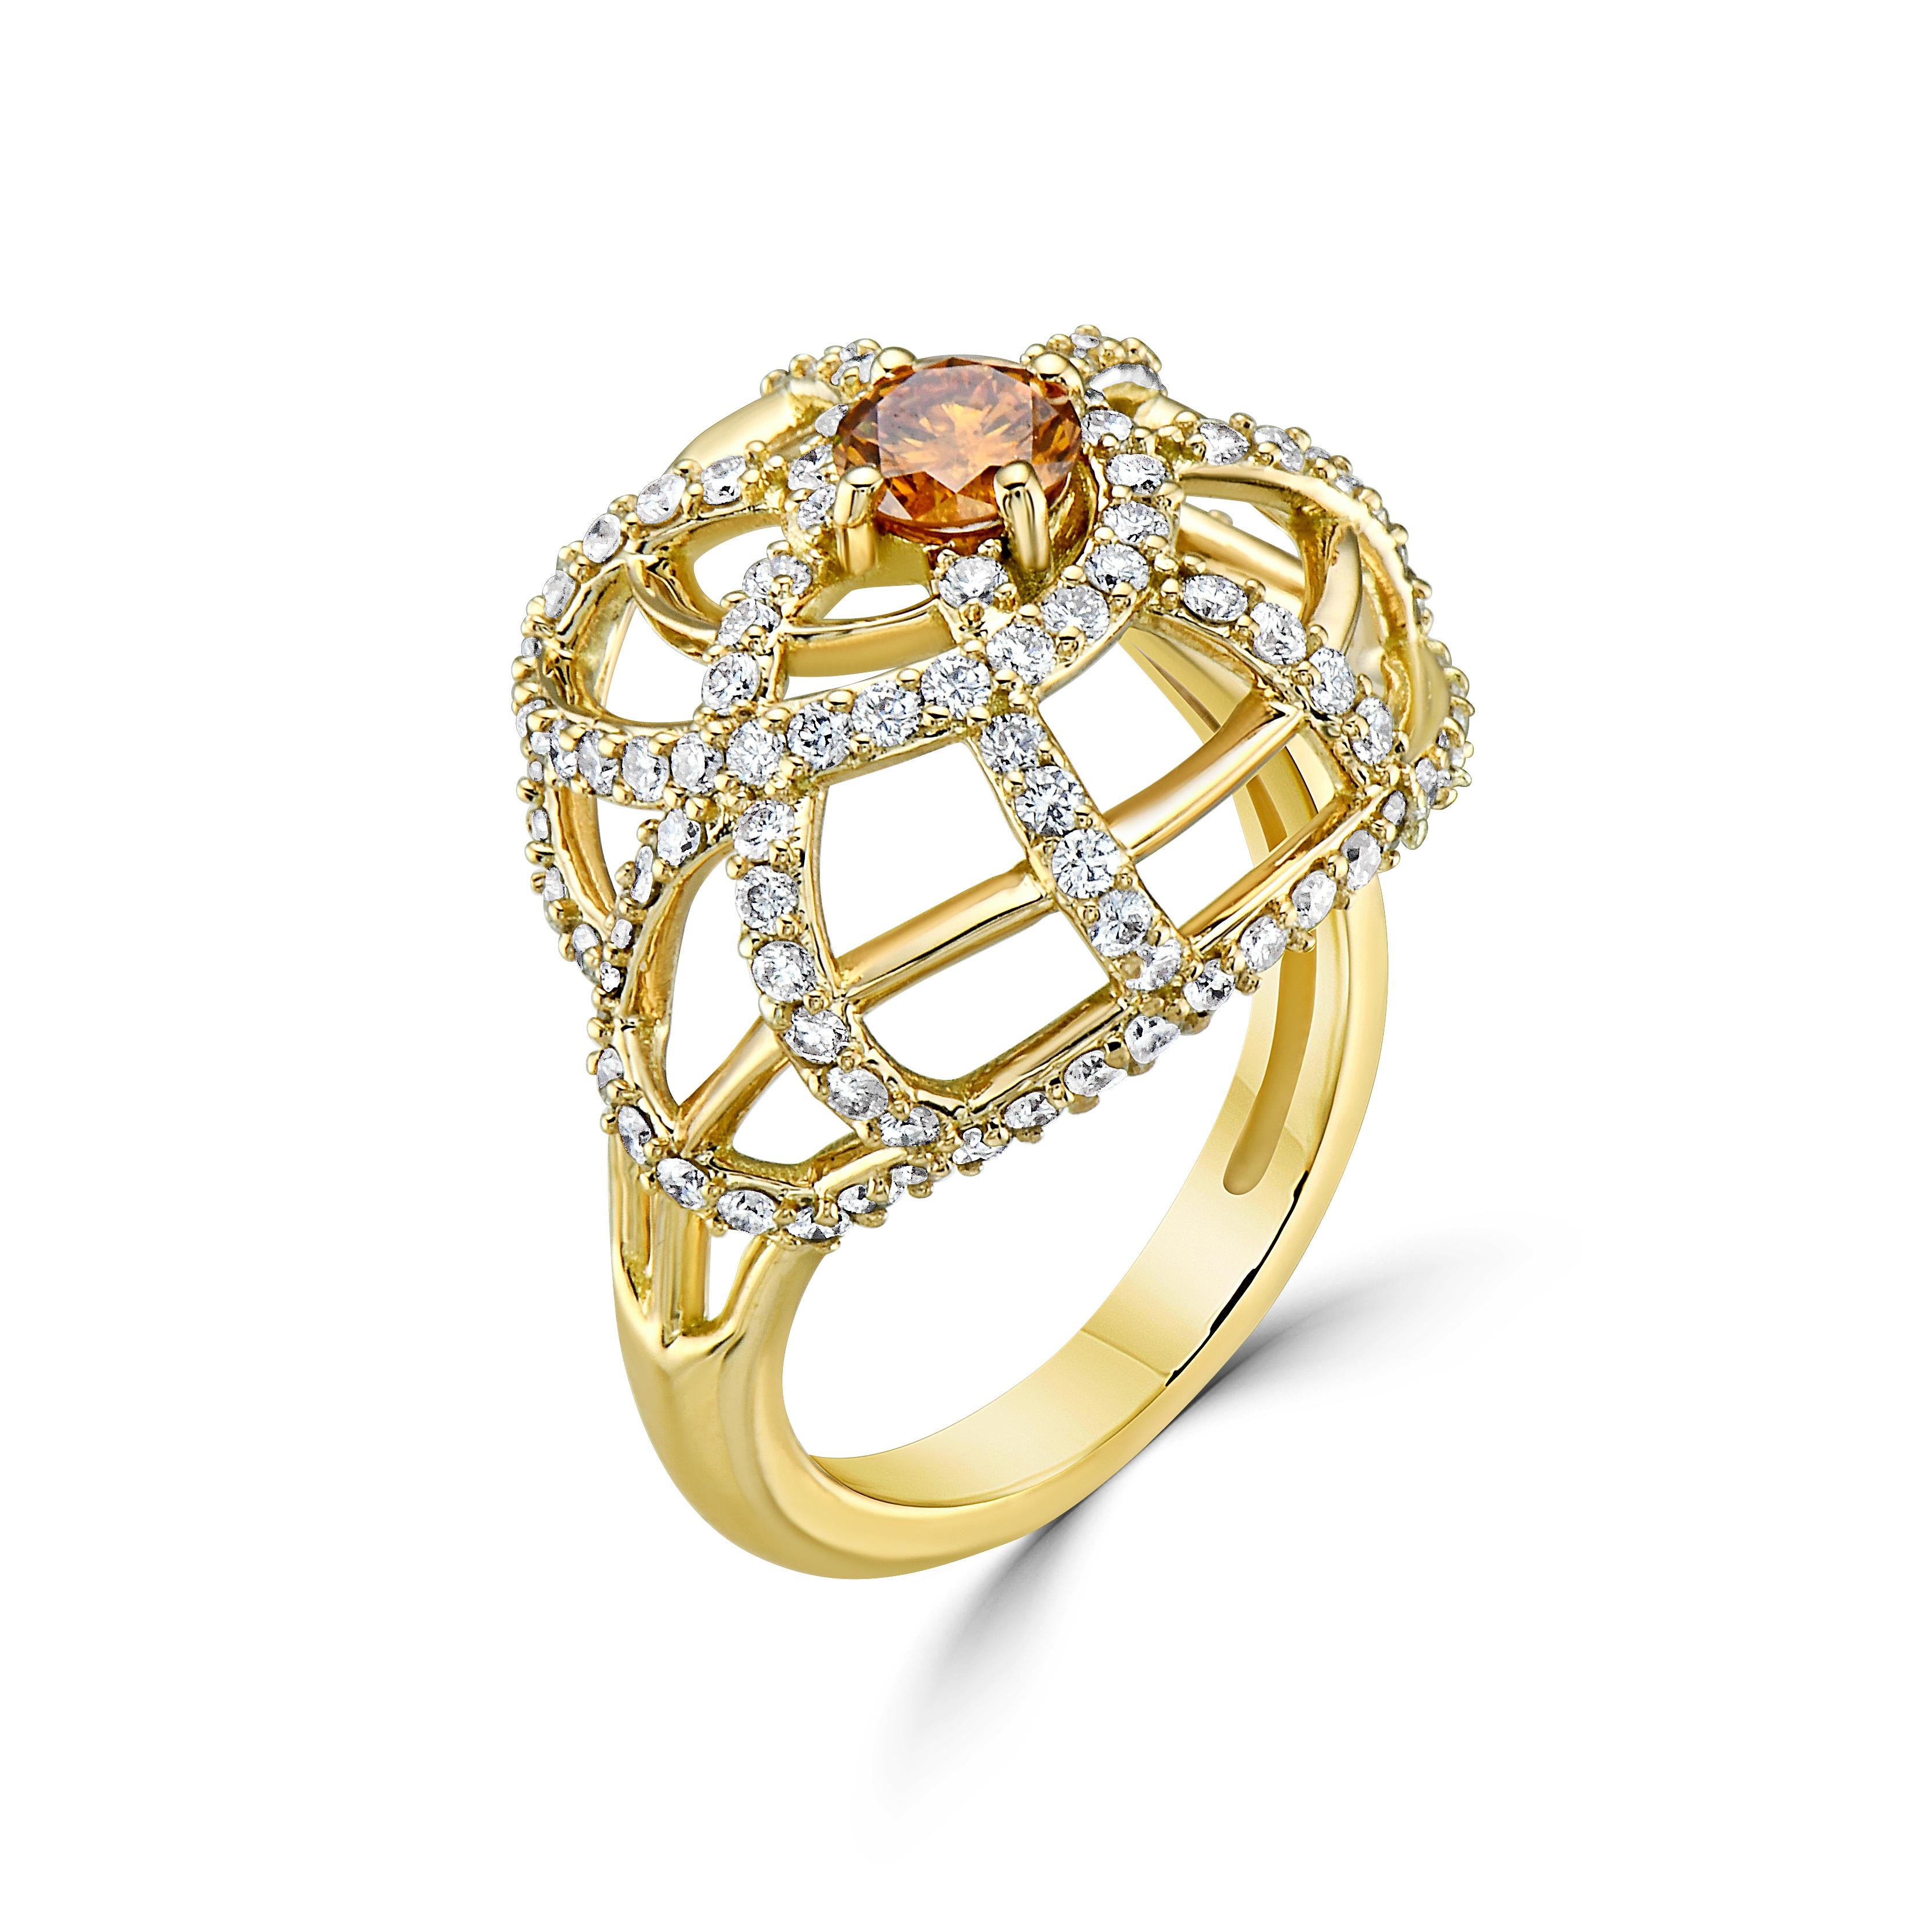 Handcrafted natural orange color diamond nautical shell ring. Designed in solid 18k gold with 1.1ct diamond pave' and 0.37ct orange fancy color, brilliant cut diamonds. 17.24 x 18.8mm

The golden ratio is a sequence that can be found across all of